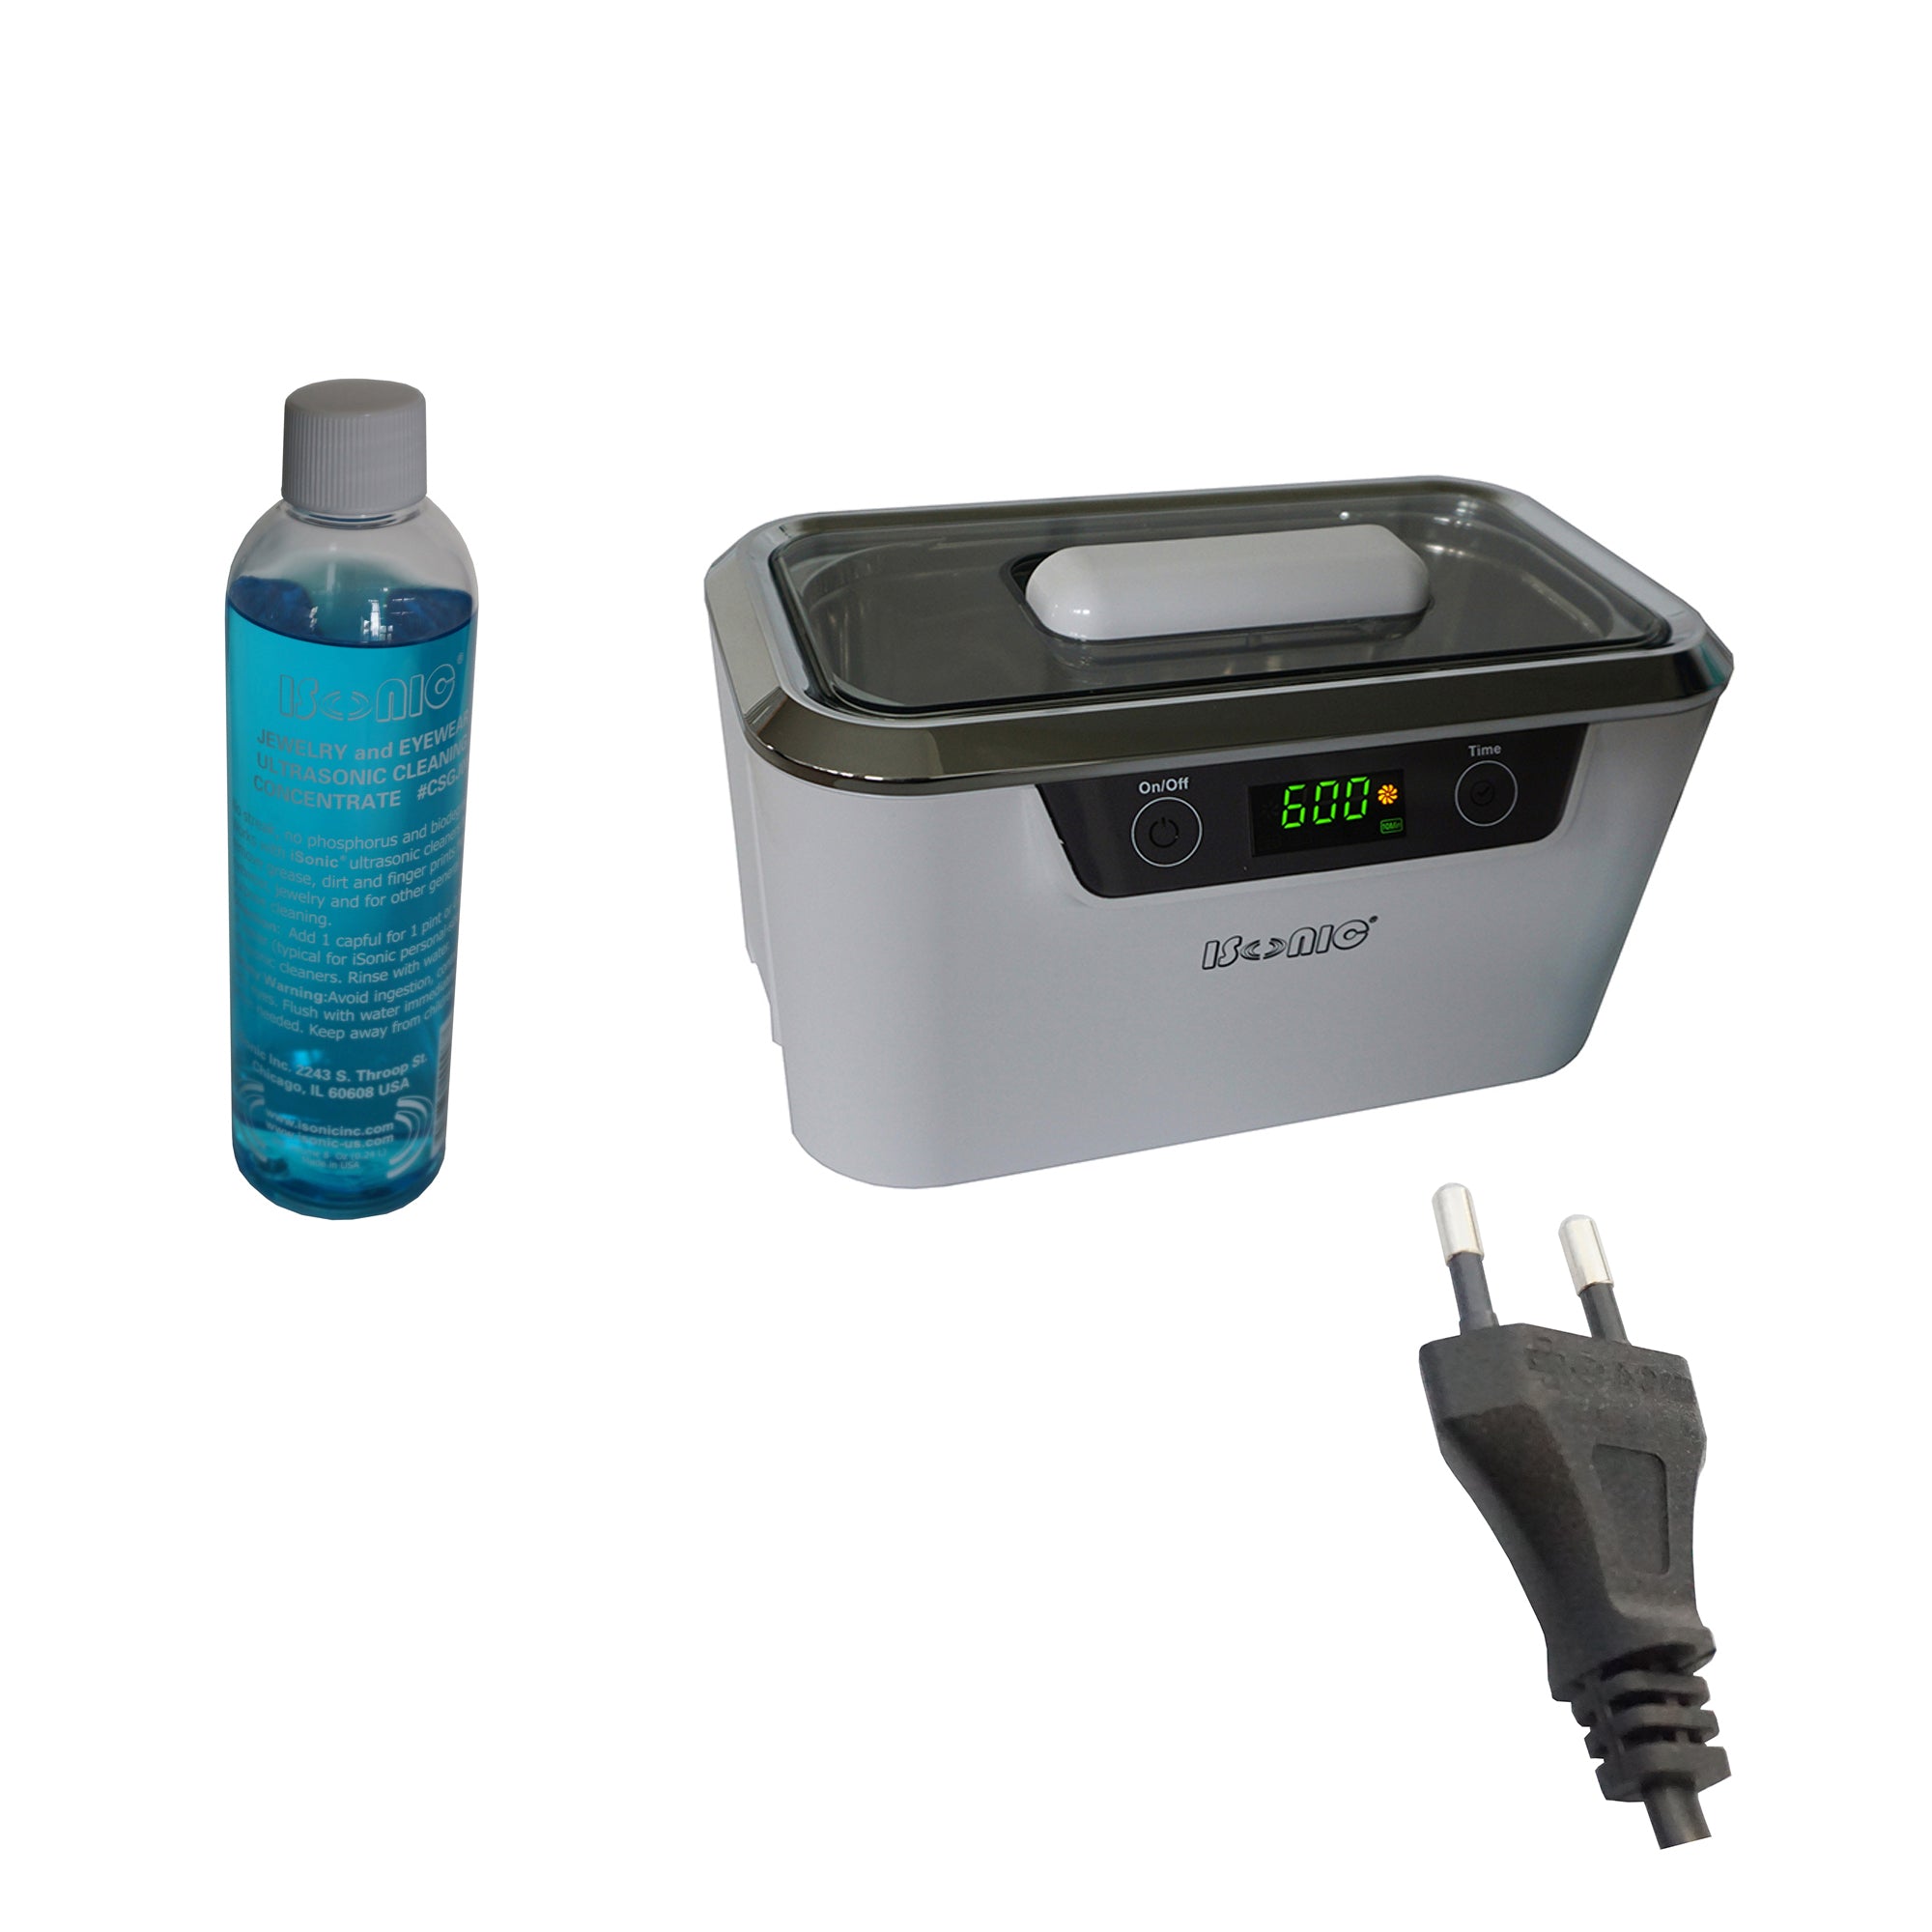 DS300+CSGJ01 | iSonic? Digital Touch Sensing Professional Ultrasonic Cleaner, with Jewelry/Eyewear Cleaning Solution Concentrate CSGJ01, 8OZ, Promotional Price!